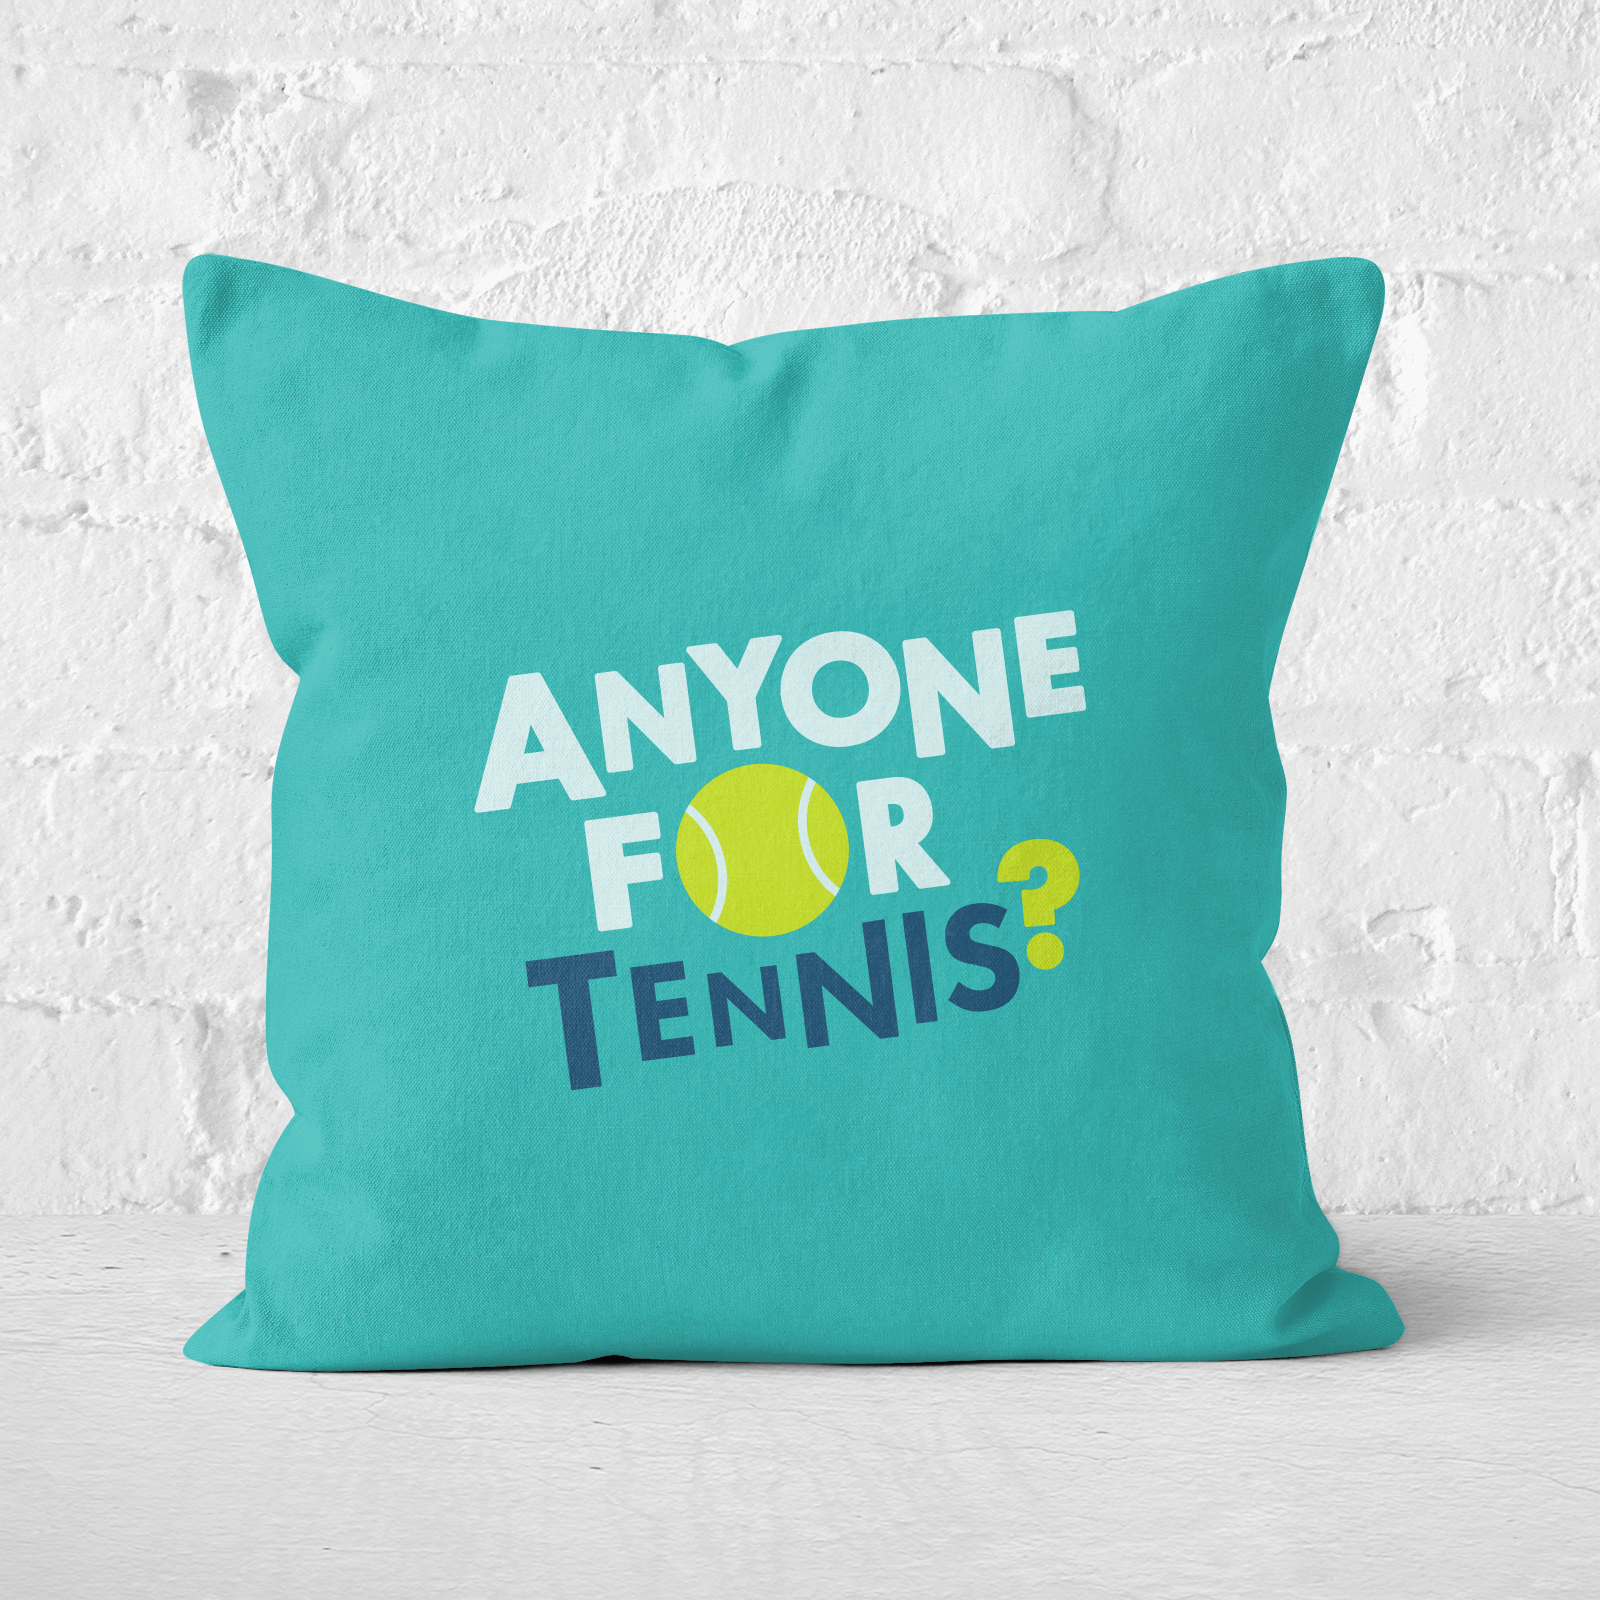 Anyone For Tennis Square Cushion   60x60cm   Soft Touch